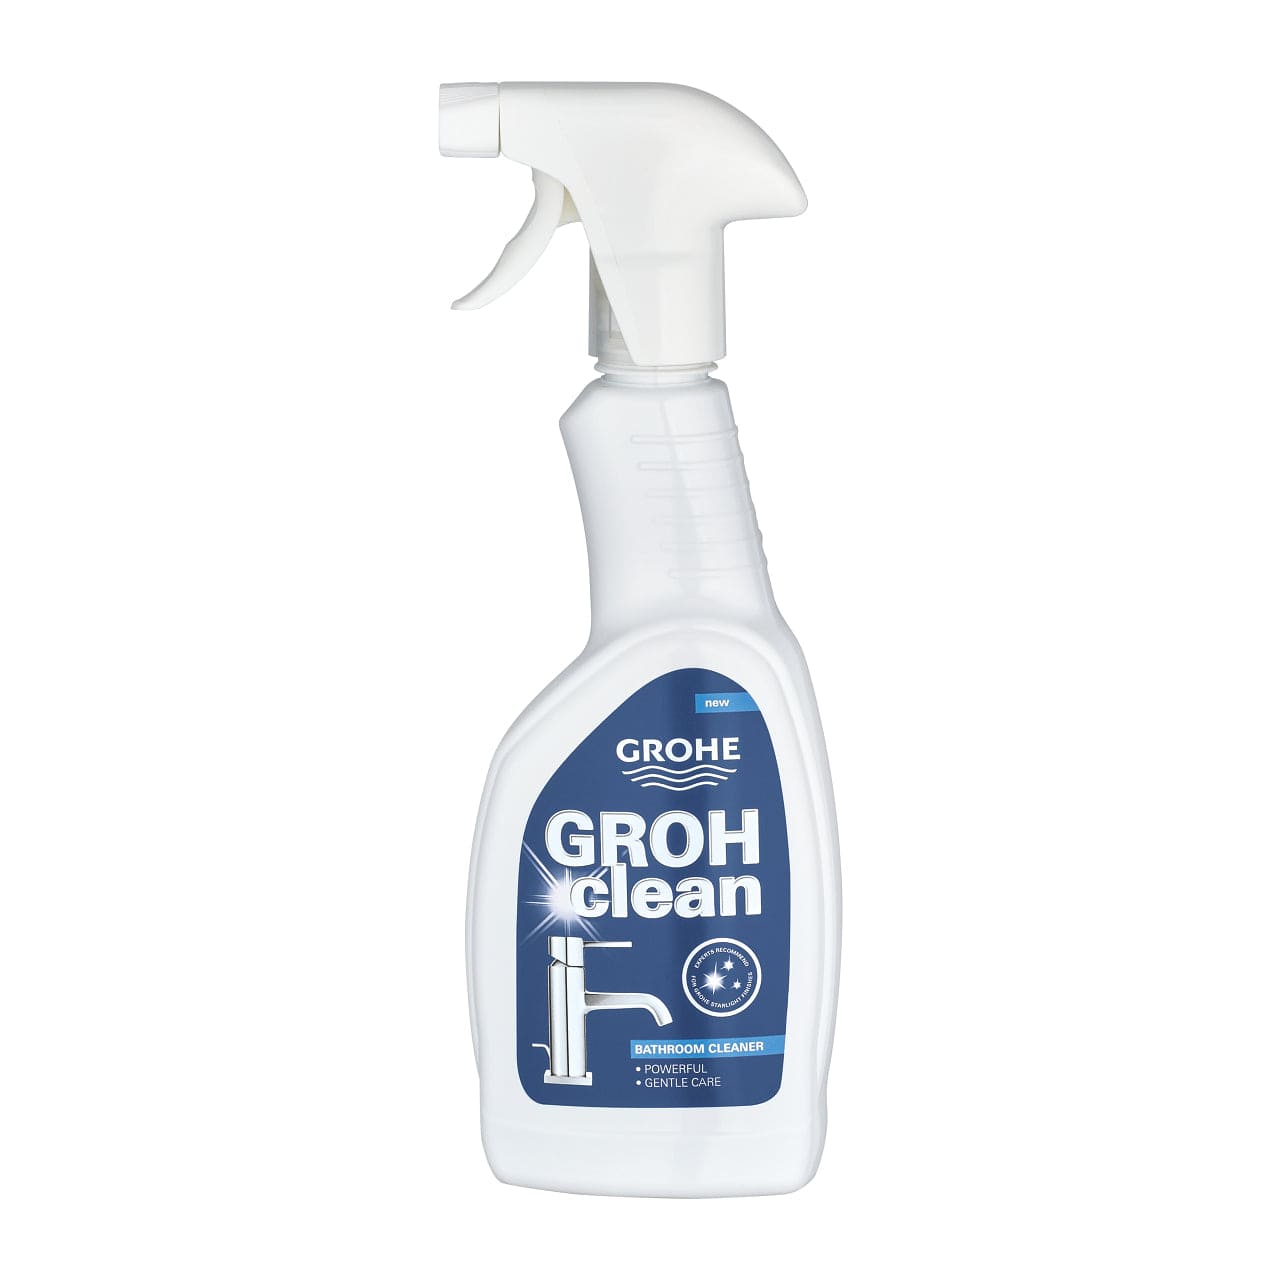 Grohe Clean Detergent for Fittings & Bathrooms 10 Pieces/Unit - 48166000 | Supply Master | Accra, Ghana Bathroom Accessories Buy Tools hardware Building materials